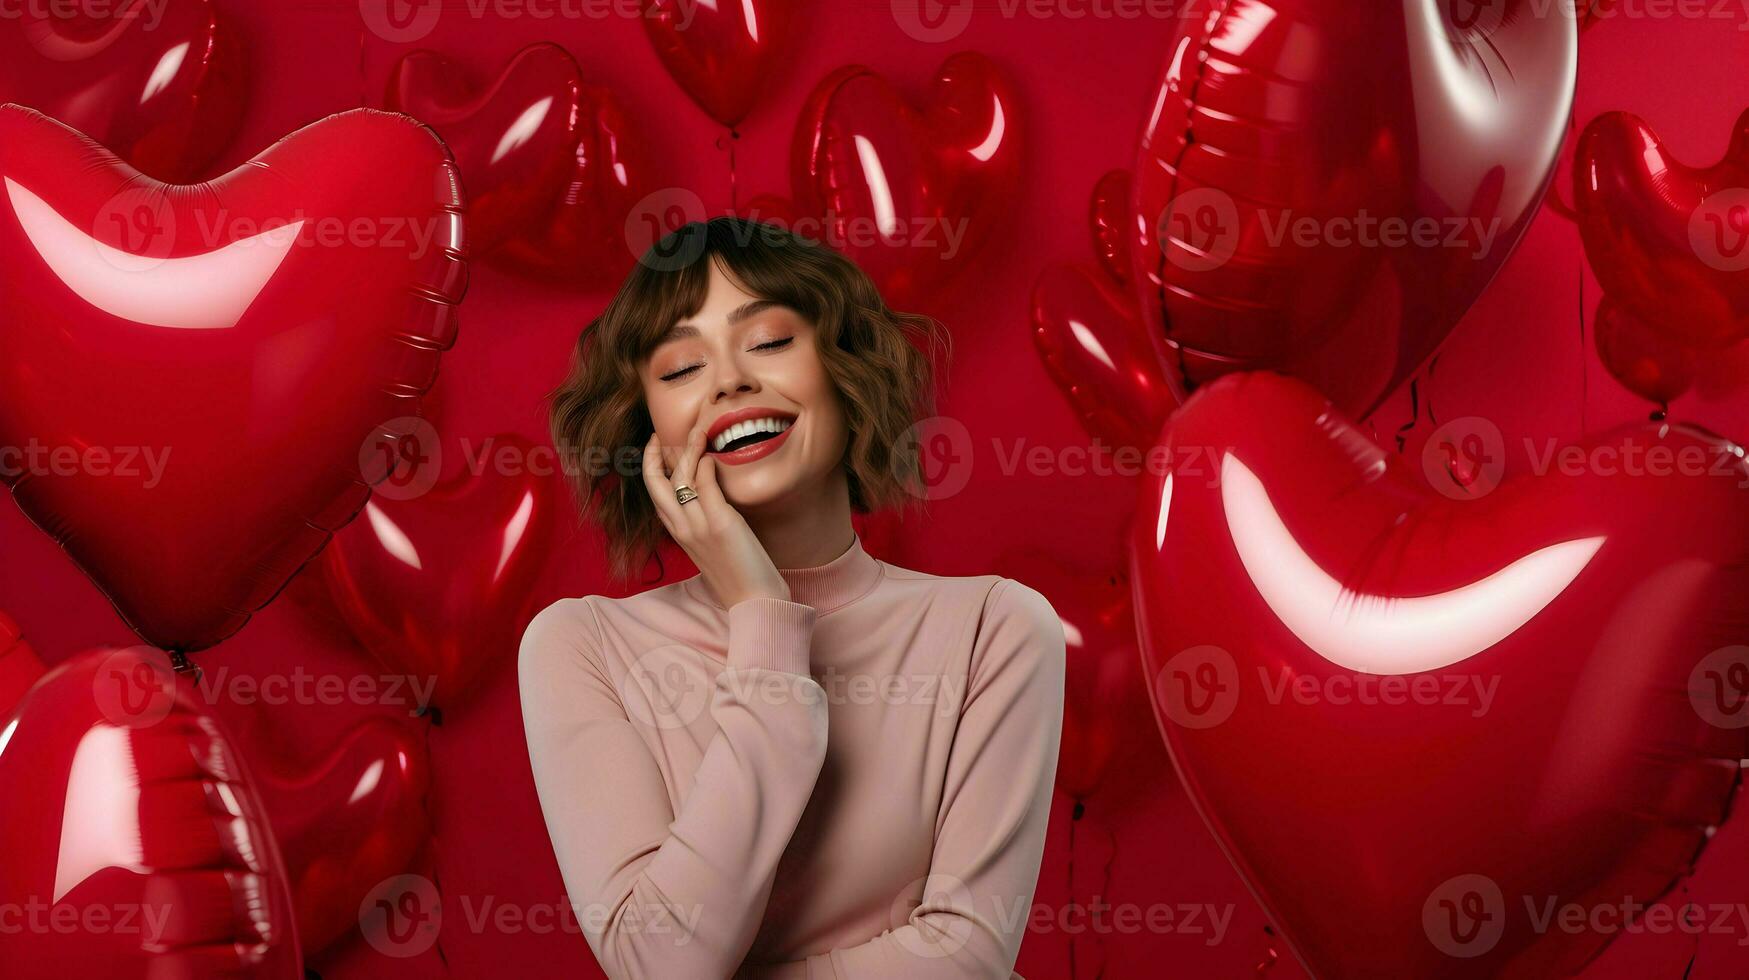 AI generated woman with heart shape balloon celebrating Valentine day photo